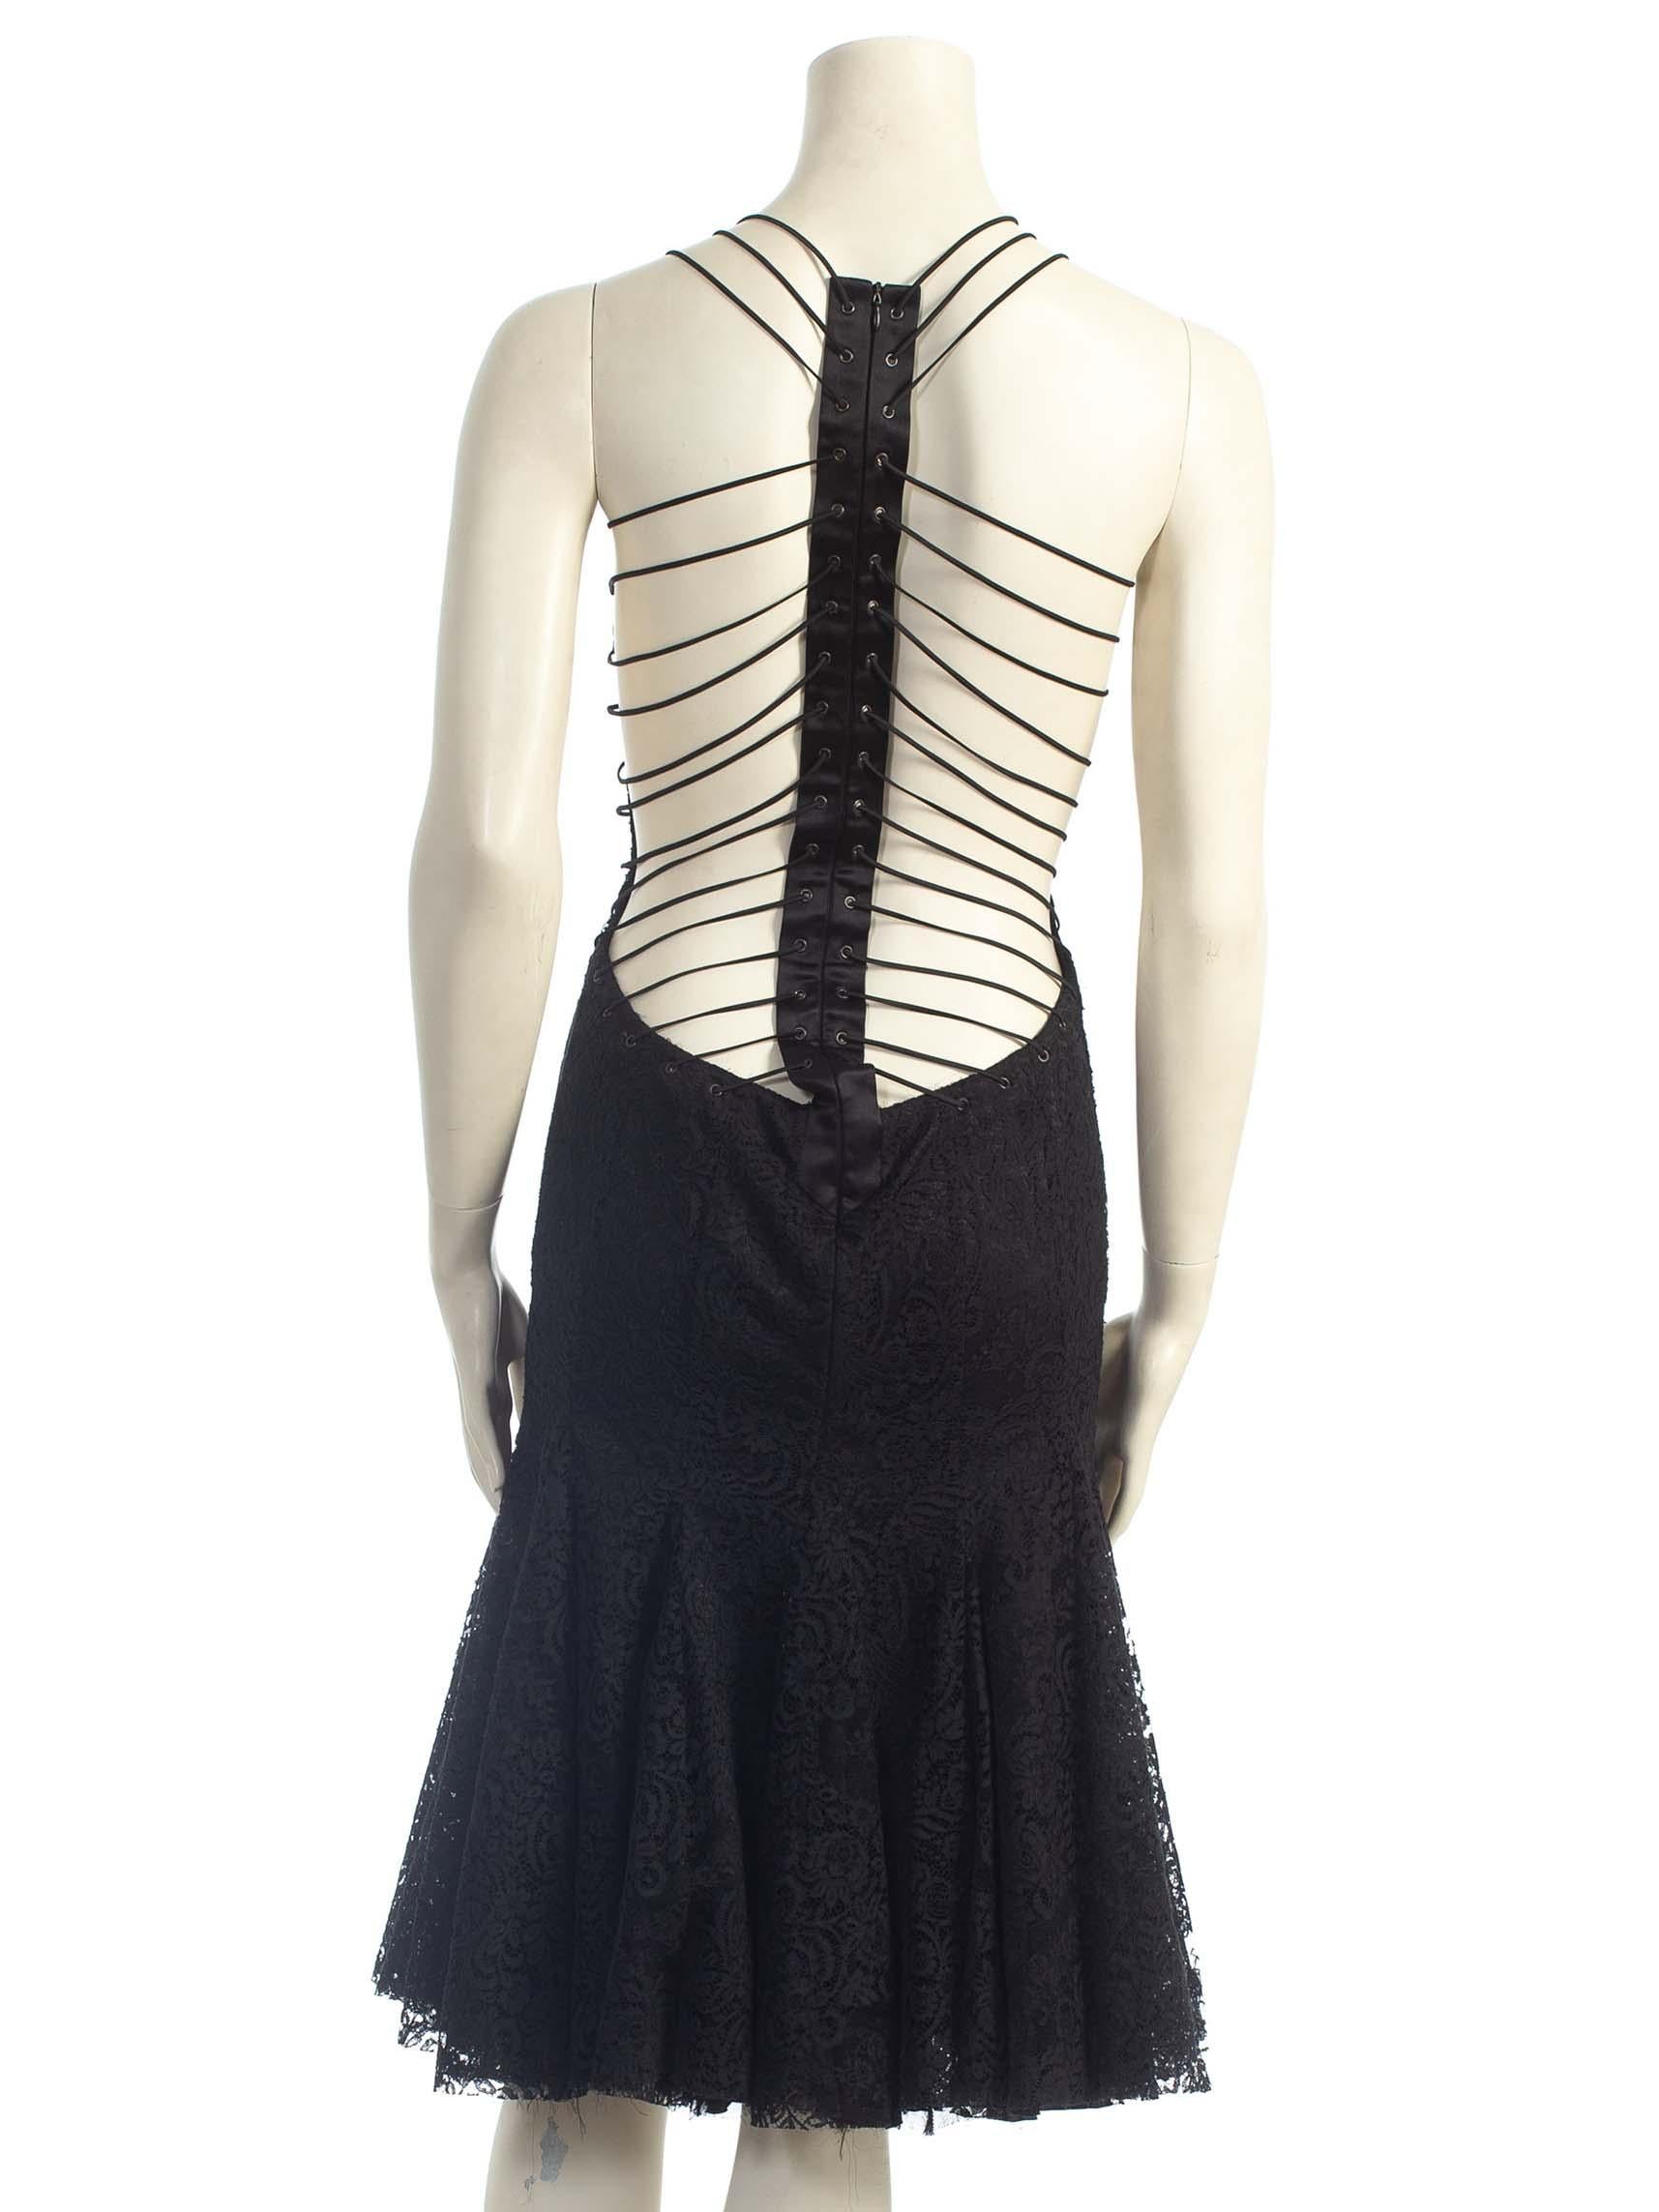 2000S ALEXANDER MCQUEEN Black Backless Rayon & Silk Lace Cocktail Dress With Sh In Excellent Condition For Sale In New York, NY